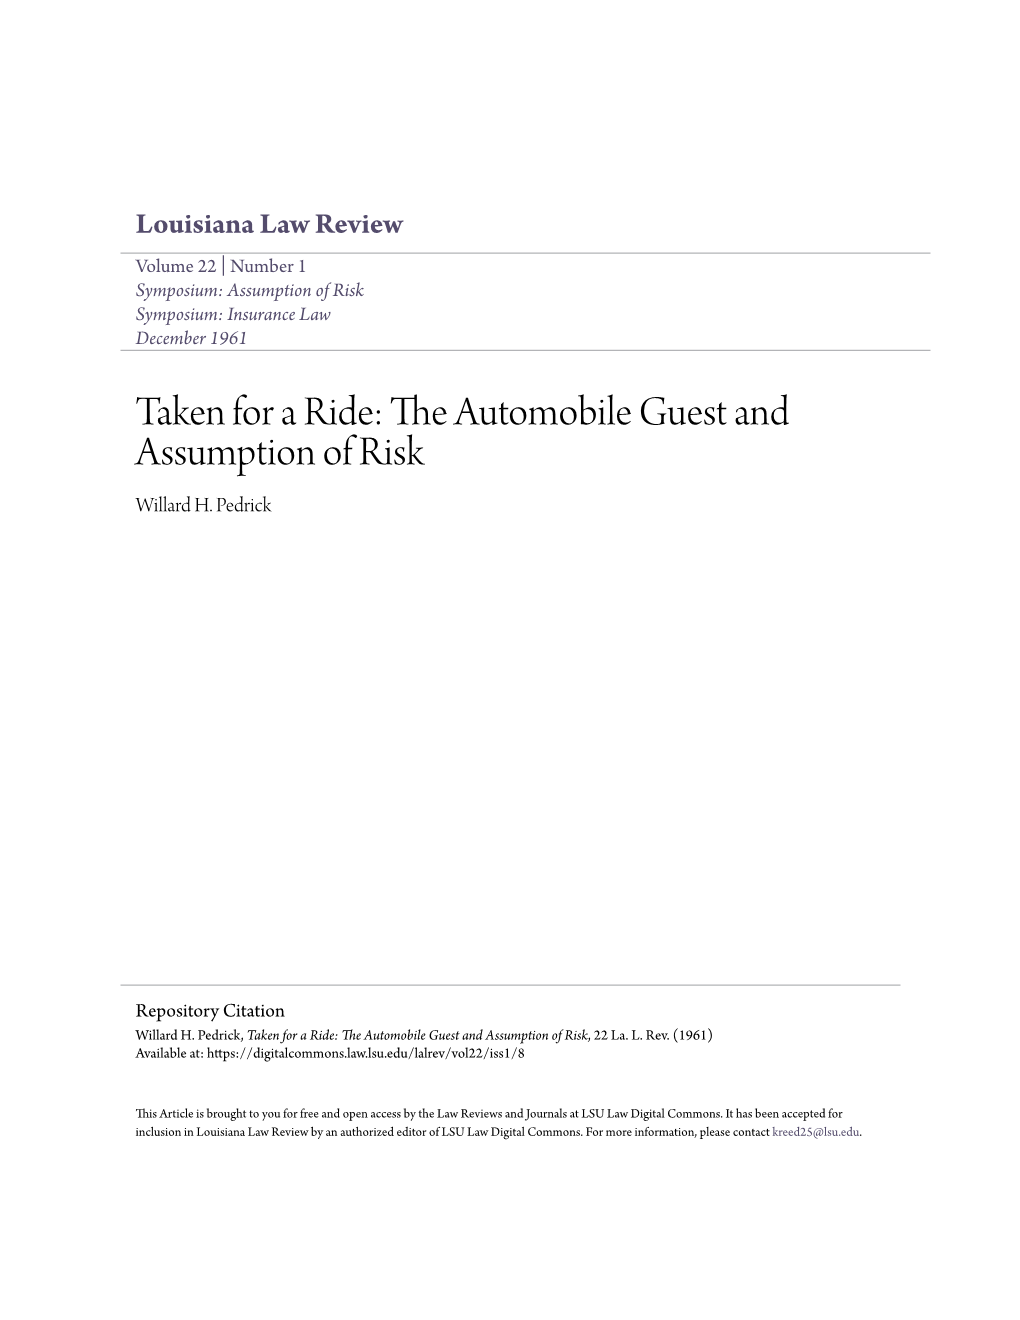 Taken for a Ride: the Automobile Guest and Assumption of Risk Willard H